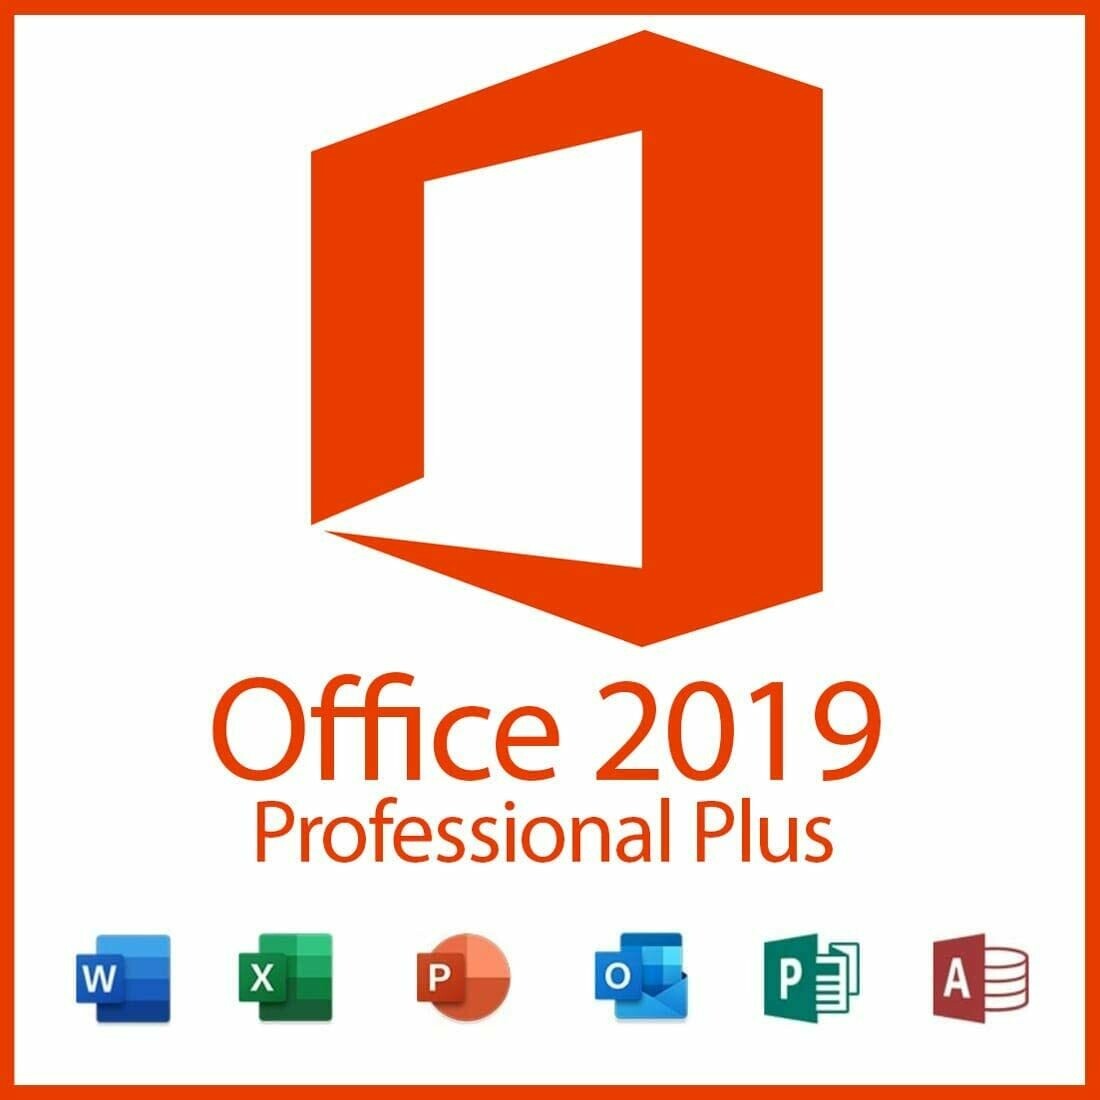 Microsoft Office Professional Plus 2019 Digital License Key Lifetime 32/64 Bit  with Download Link Global Language for Windows(Not CD)